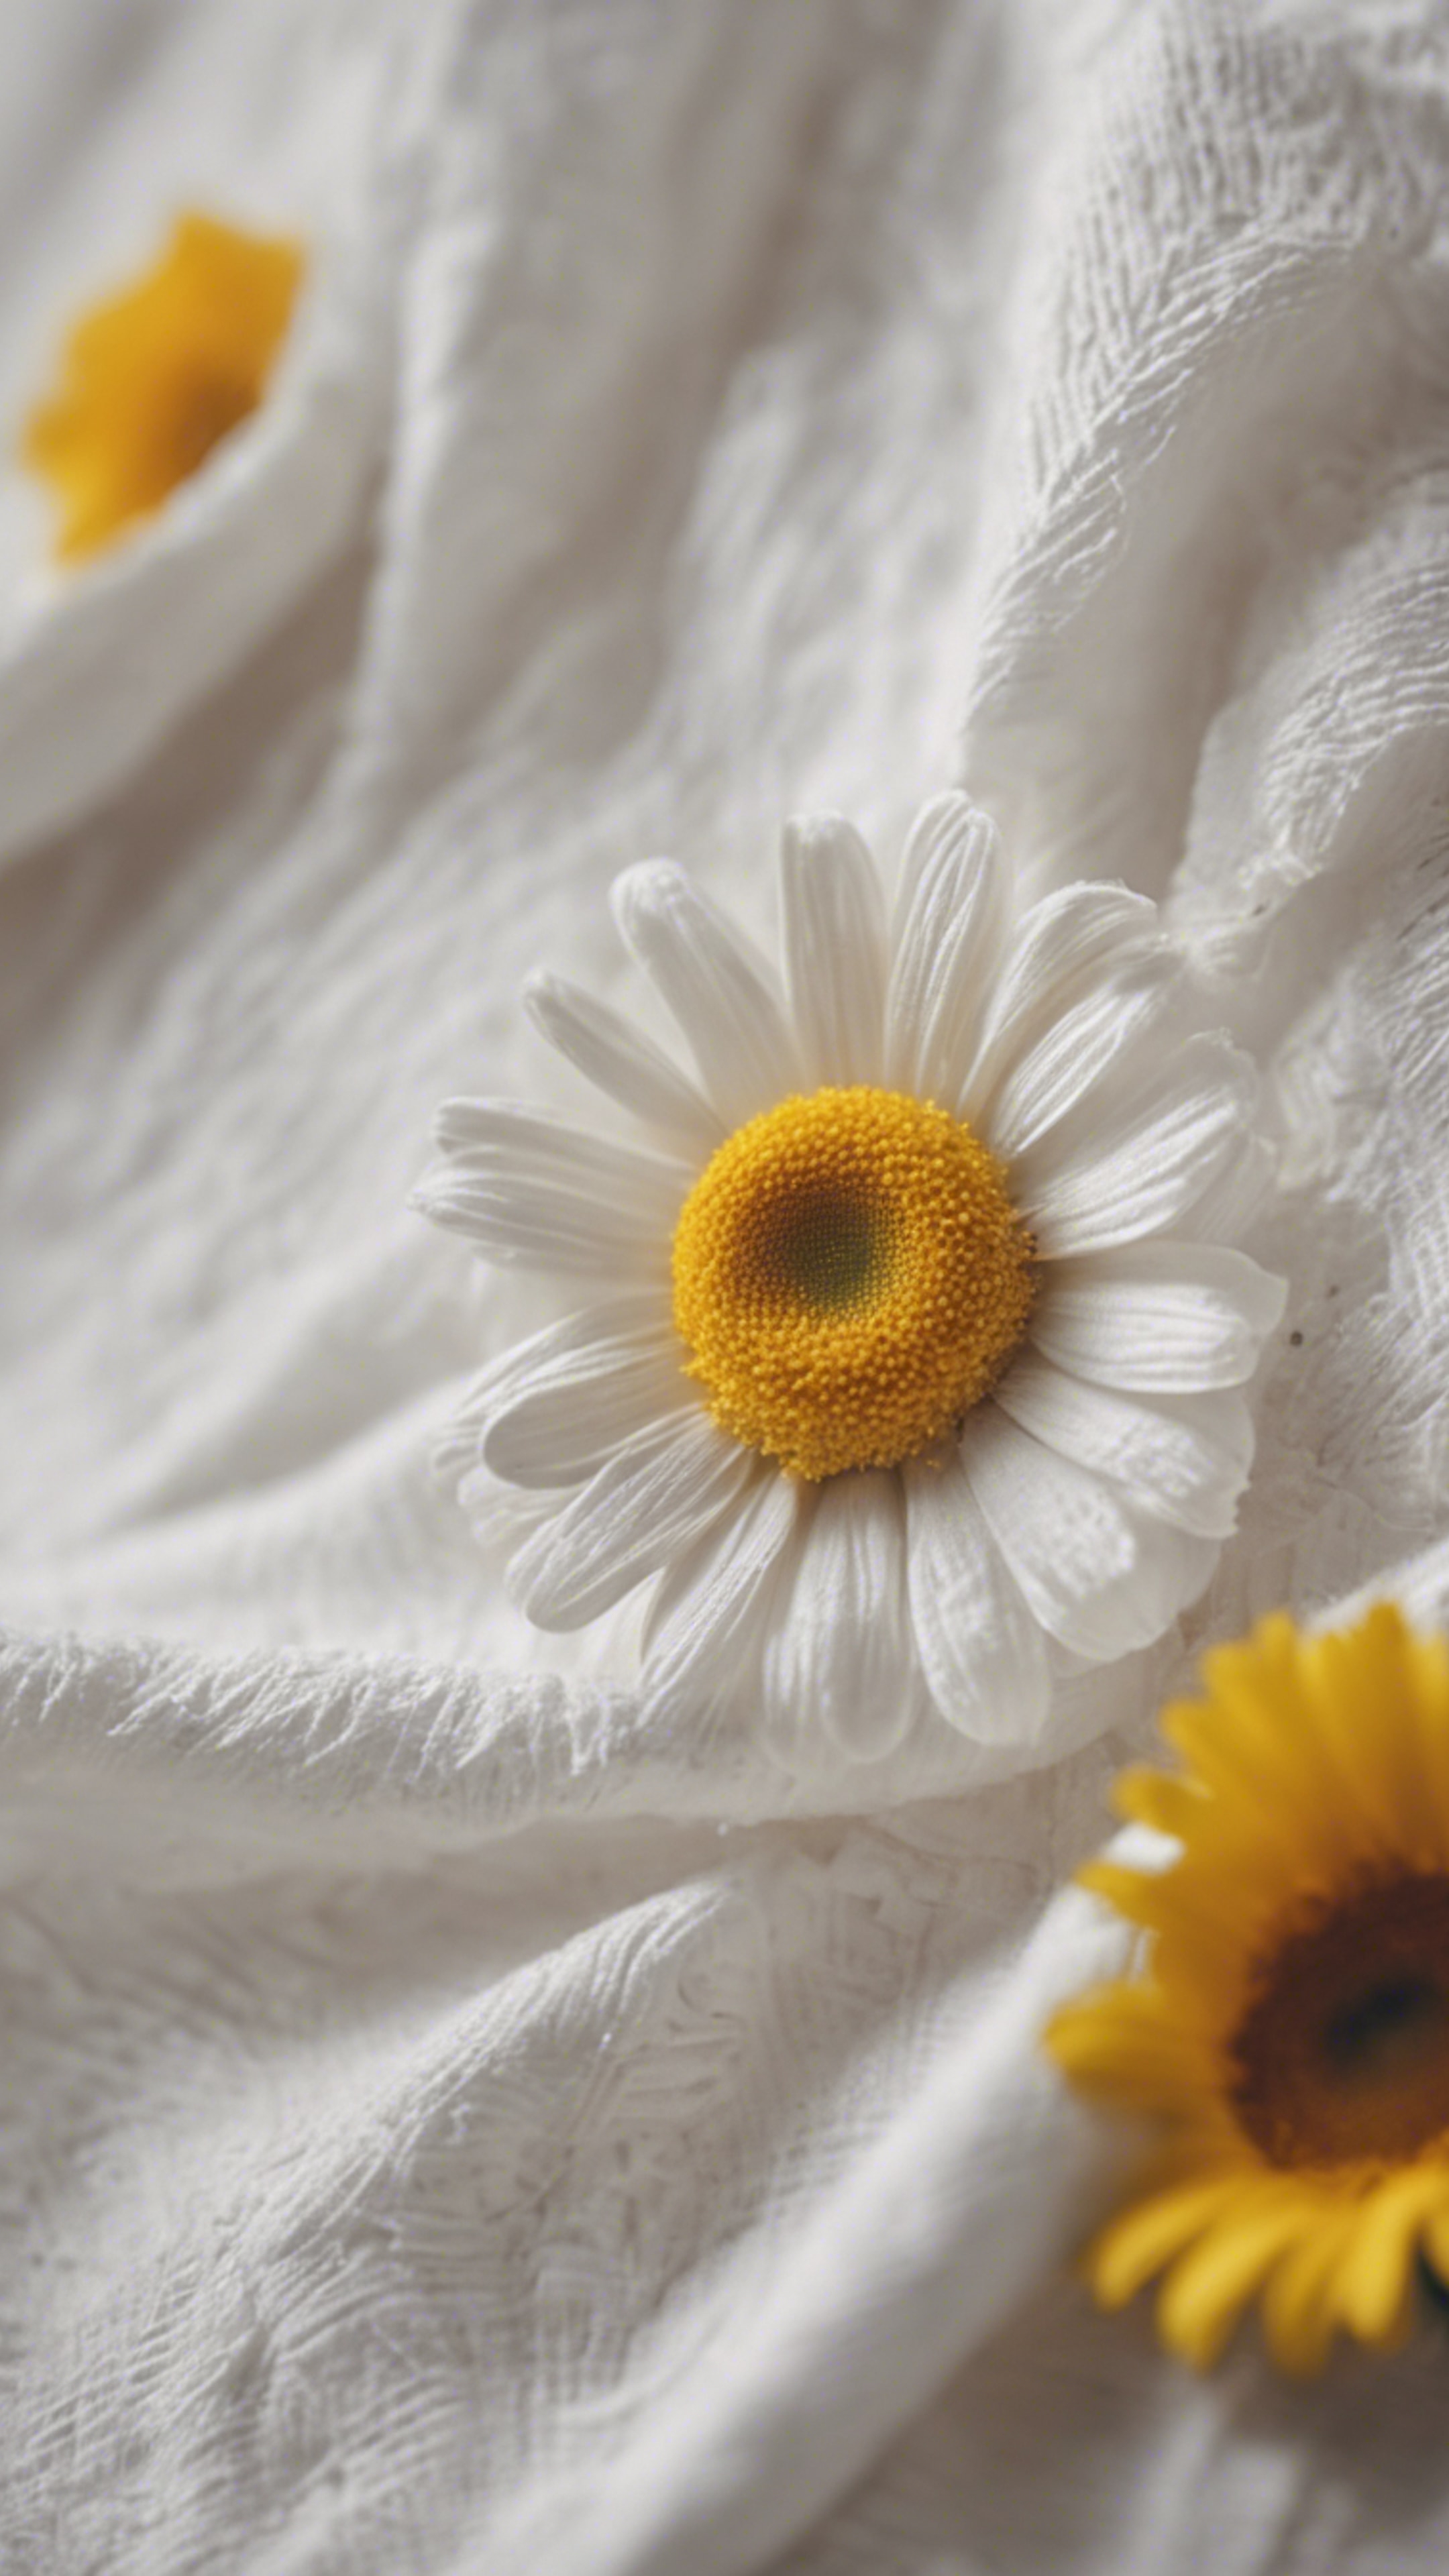 A white cotton dress with a daisy, featuring yellow petals and a white center. 墙纸[81c17e18773146008e6c]